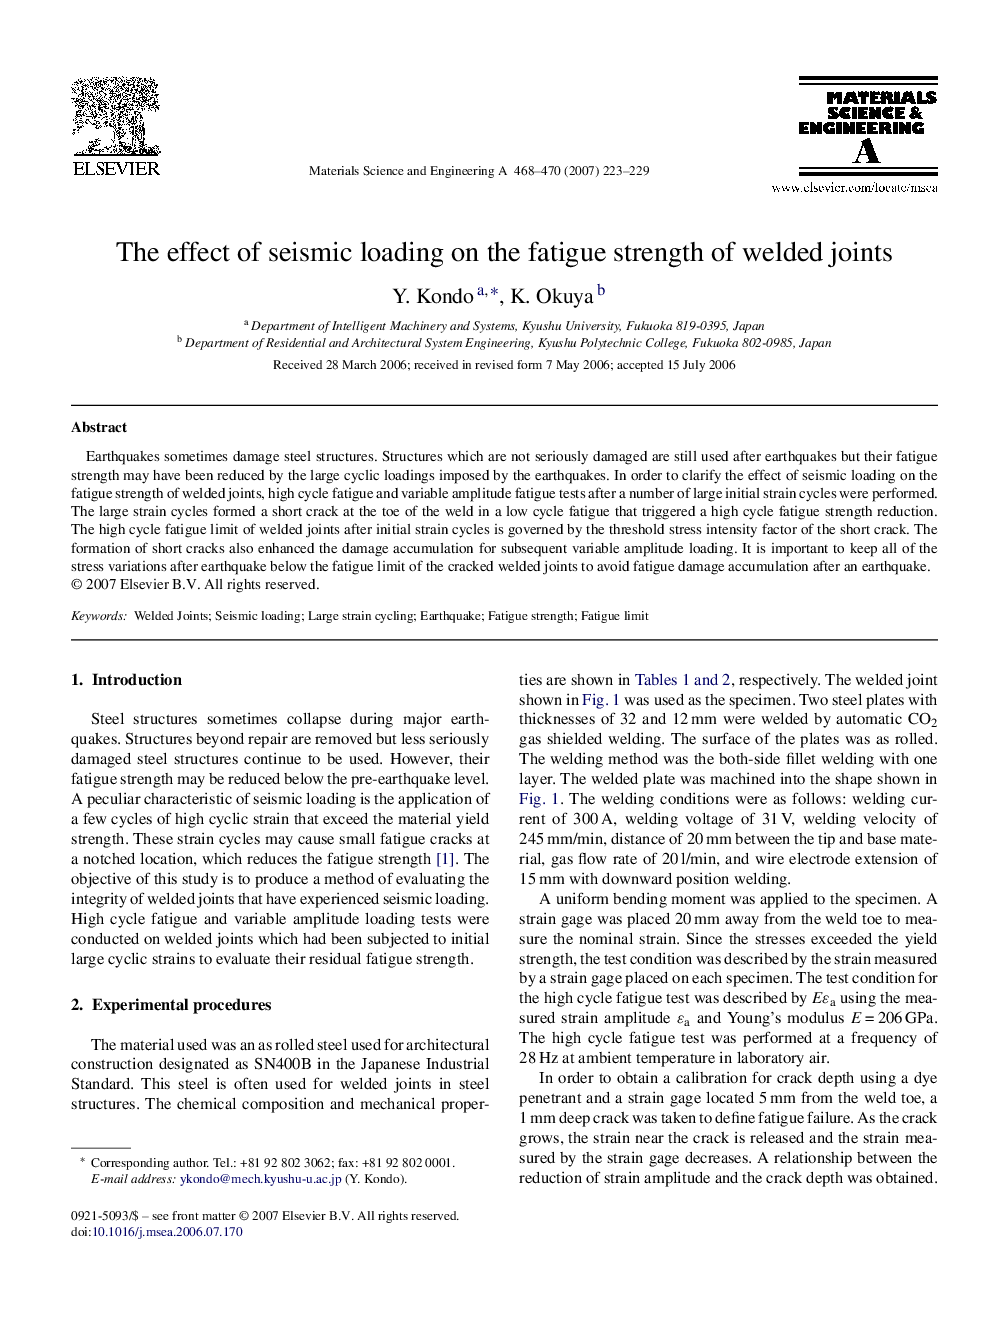 The effect of seismic loading on the fatigue strength of welded joints